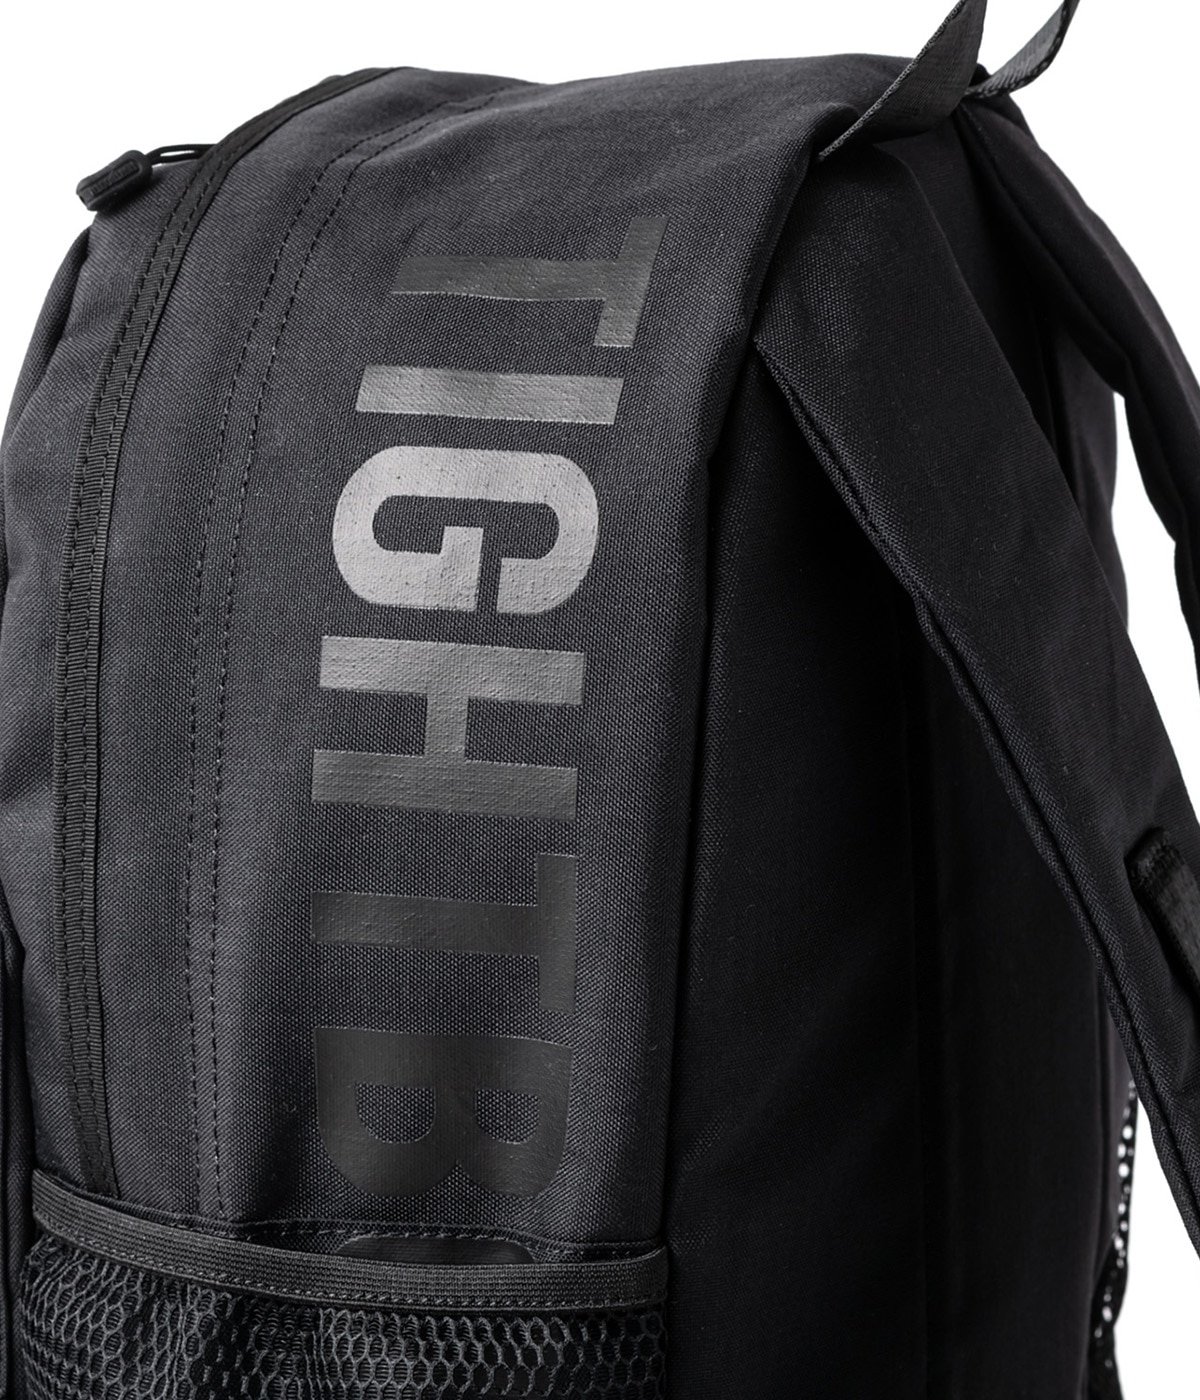 TBPR / DOUBLE POCKET BACKPACK | TIGHTBOOTH(タイトブース) / バッグ ...